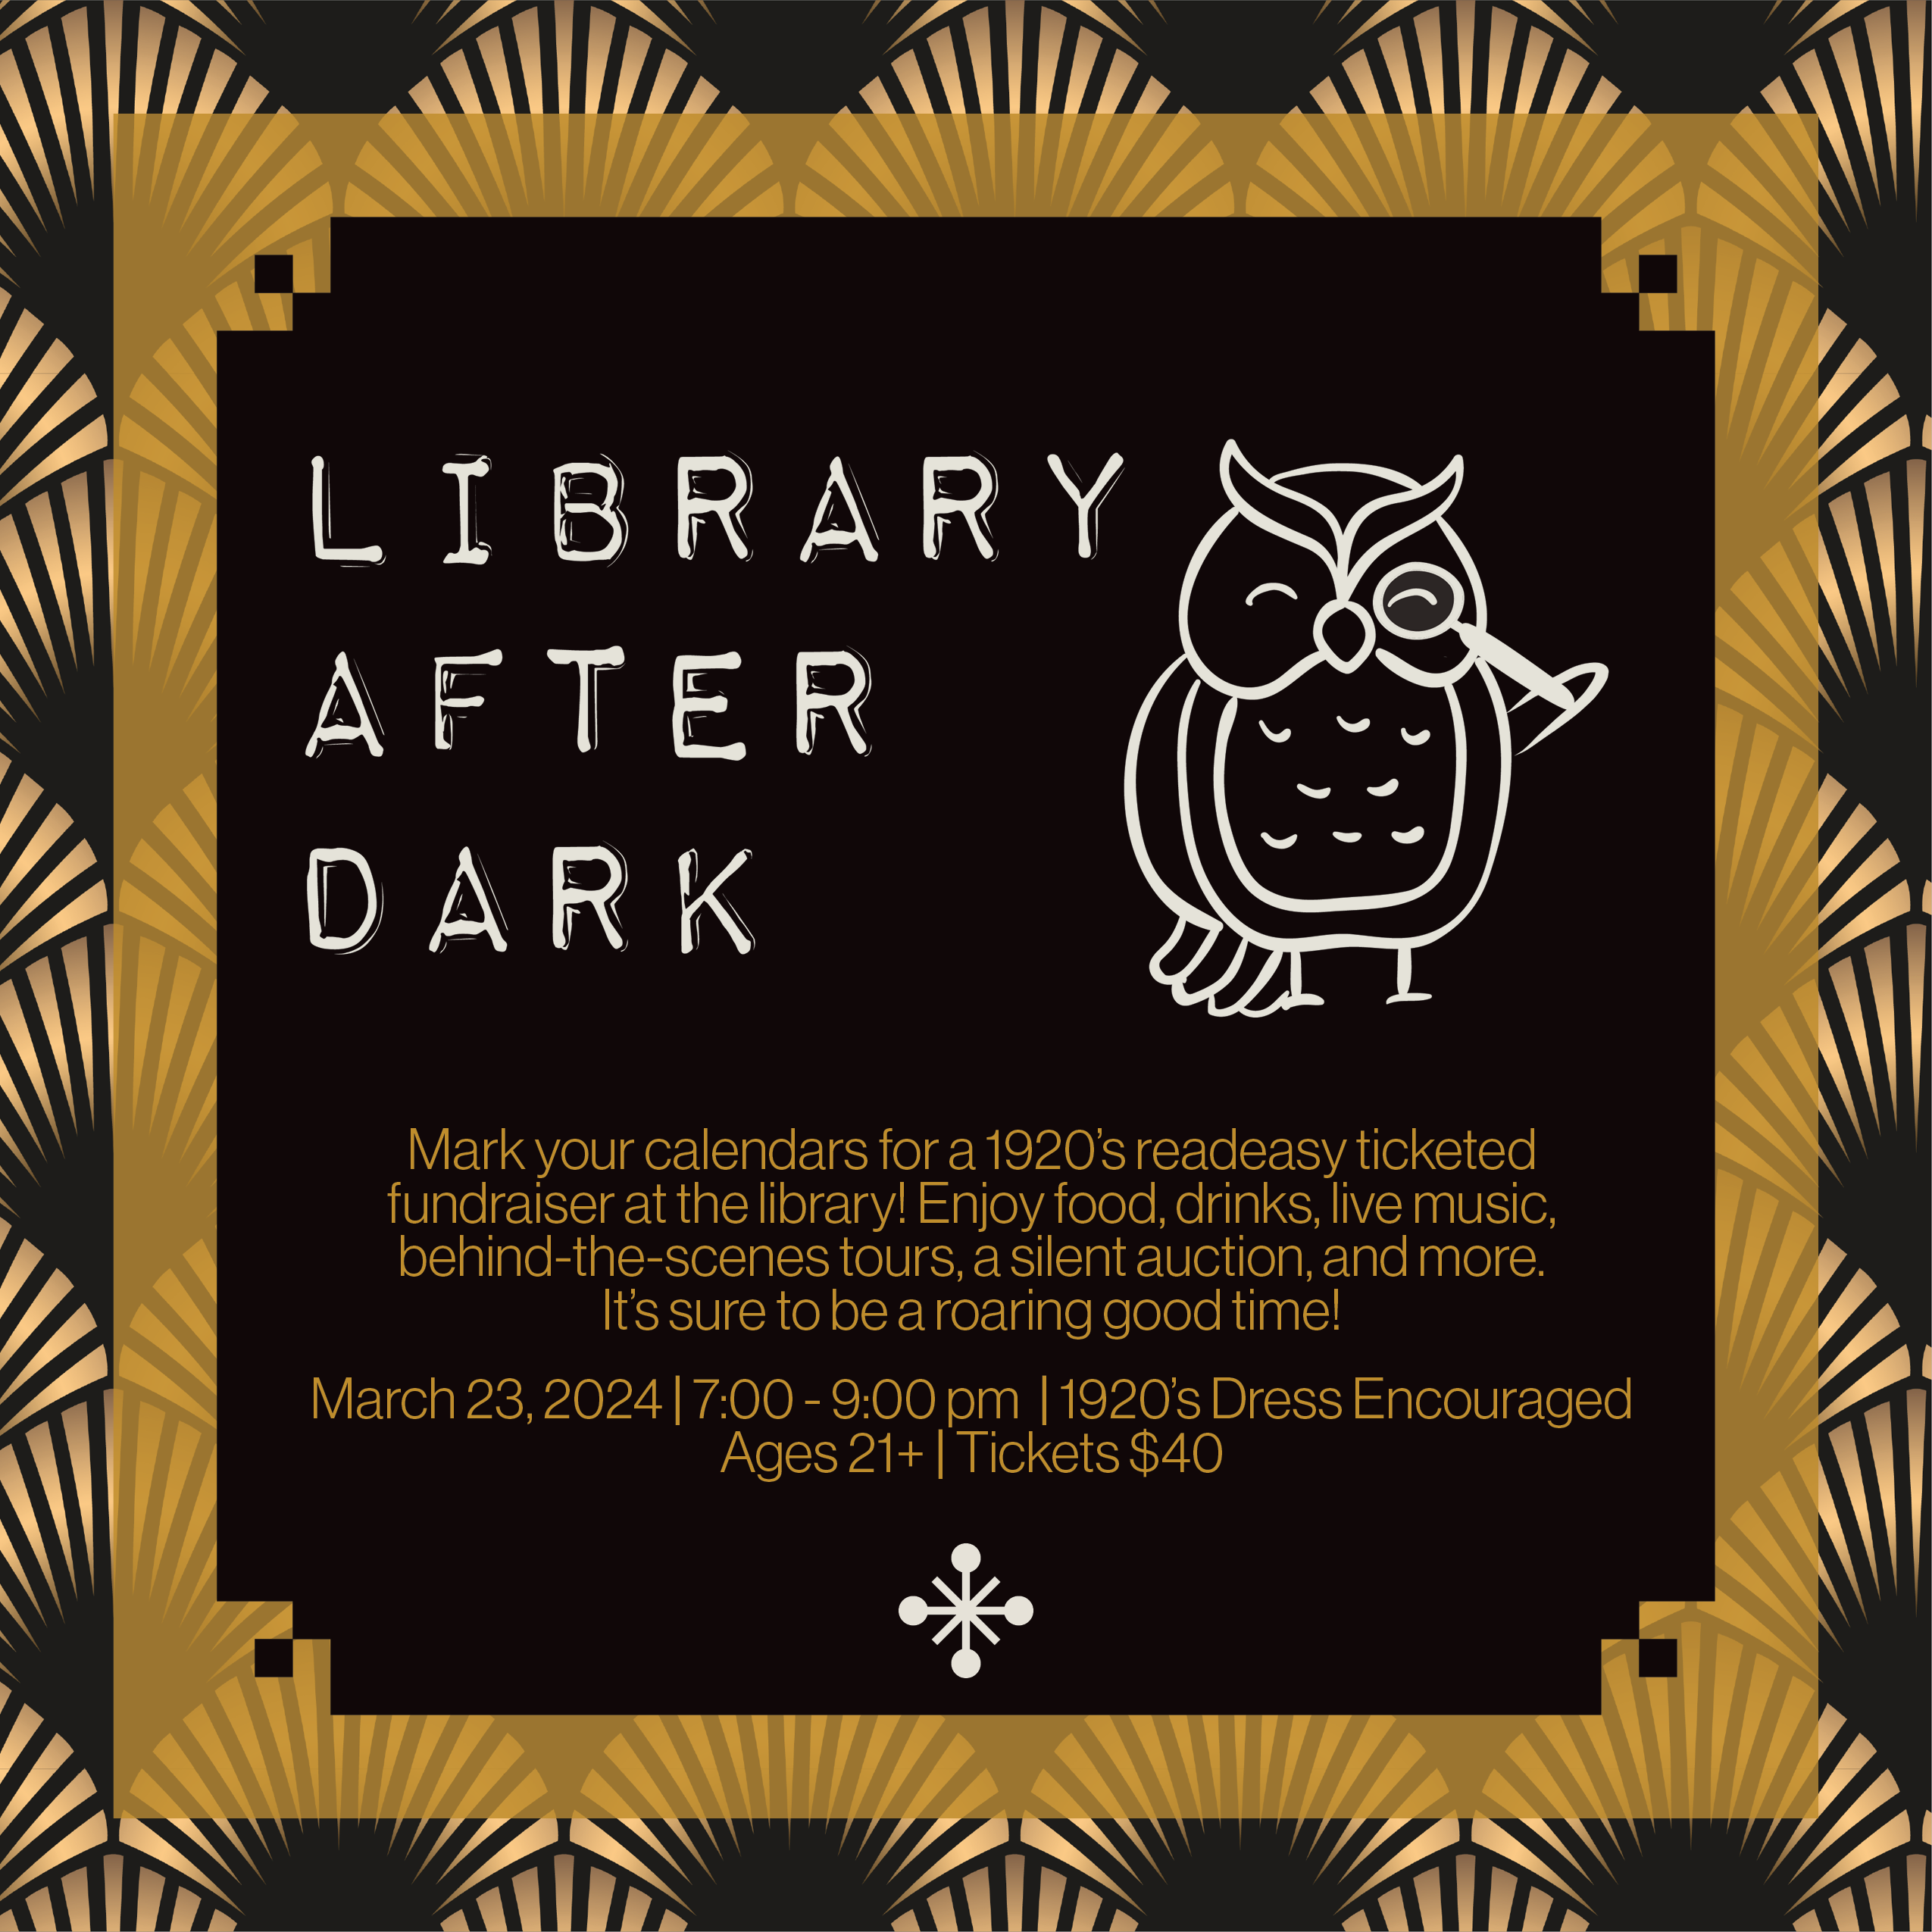 Mark your calendars for a 1920's readeasy fundraiser! This Library After Dark fundraiser design featured black and gold Gatsby-esc elements along with our 2024 Summer Reading owl mascot that is holding a magnifying glass 